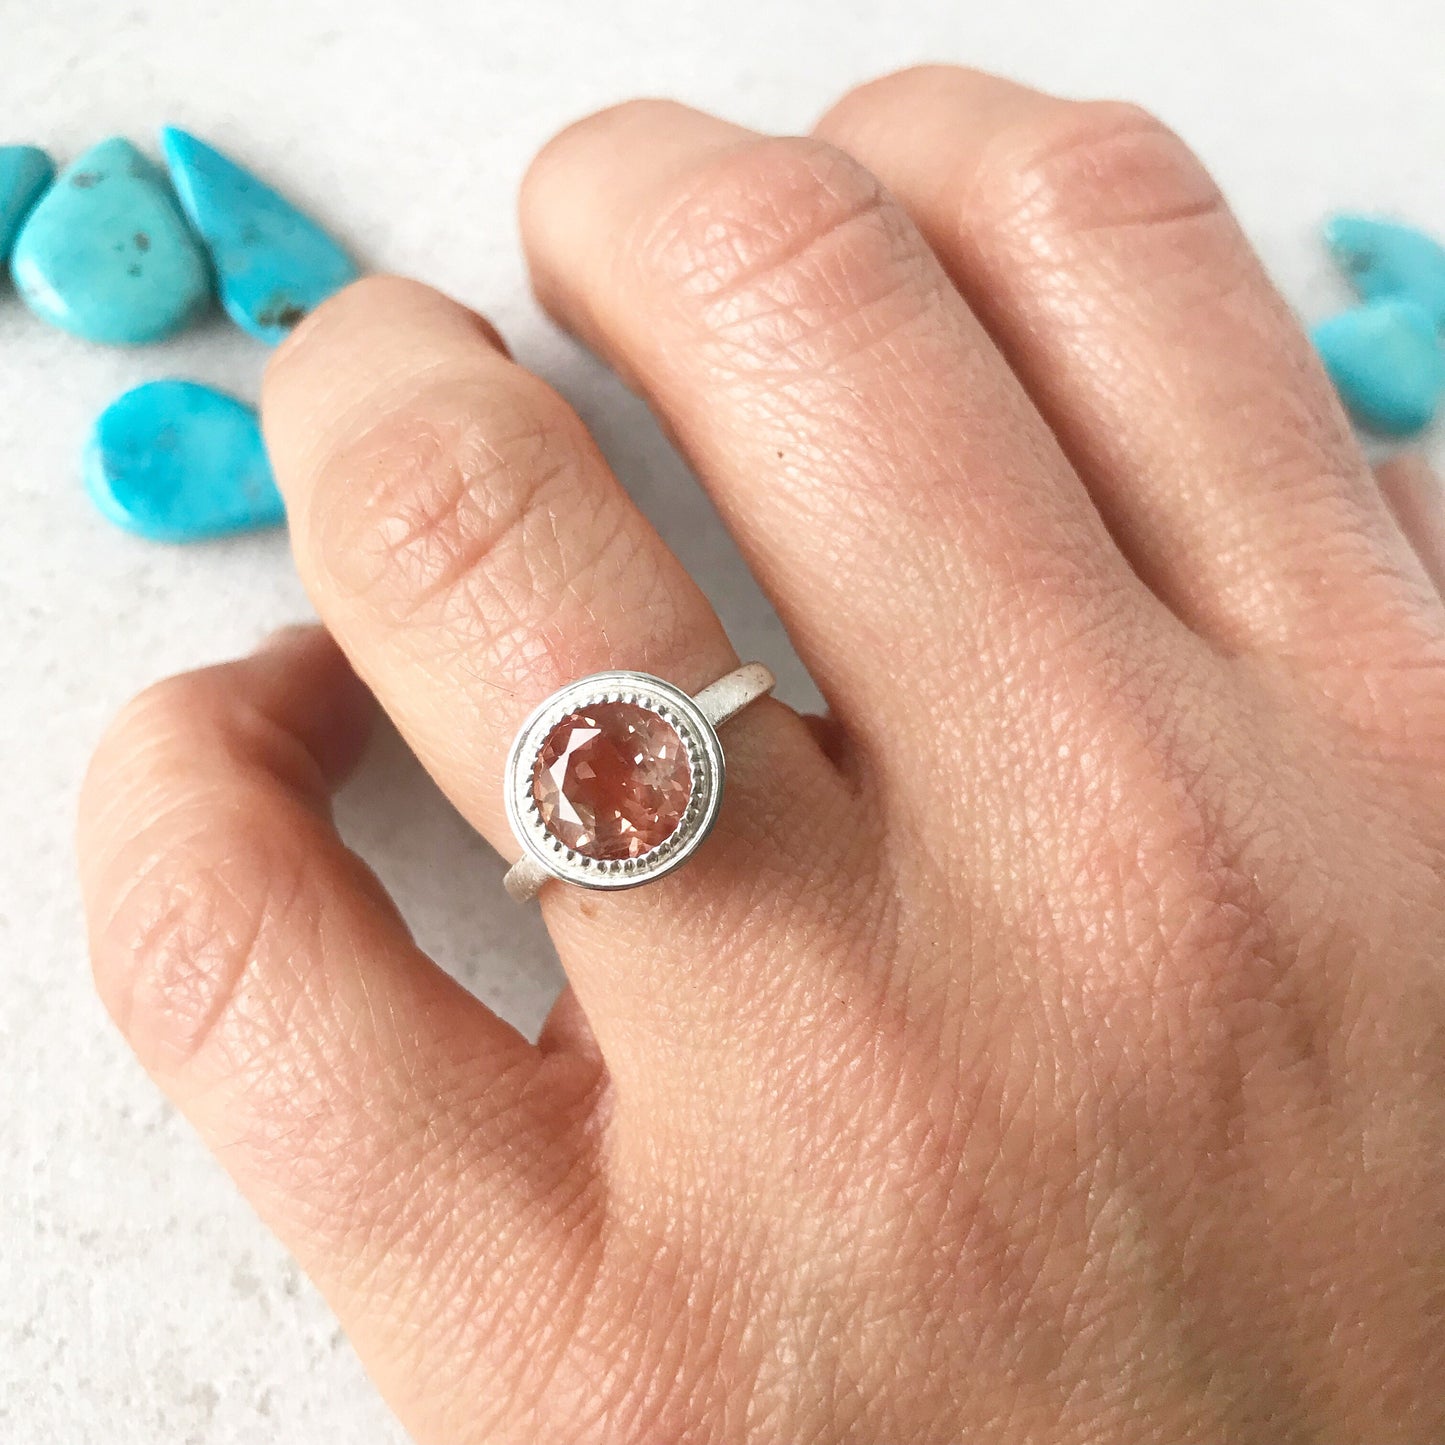 A woman's hand holding a handmade Oregon Sunstone Milgrain Ring in Brushed Sterling Silver by Cassin Jewelry.